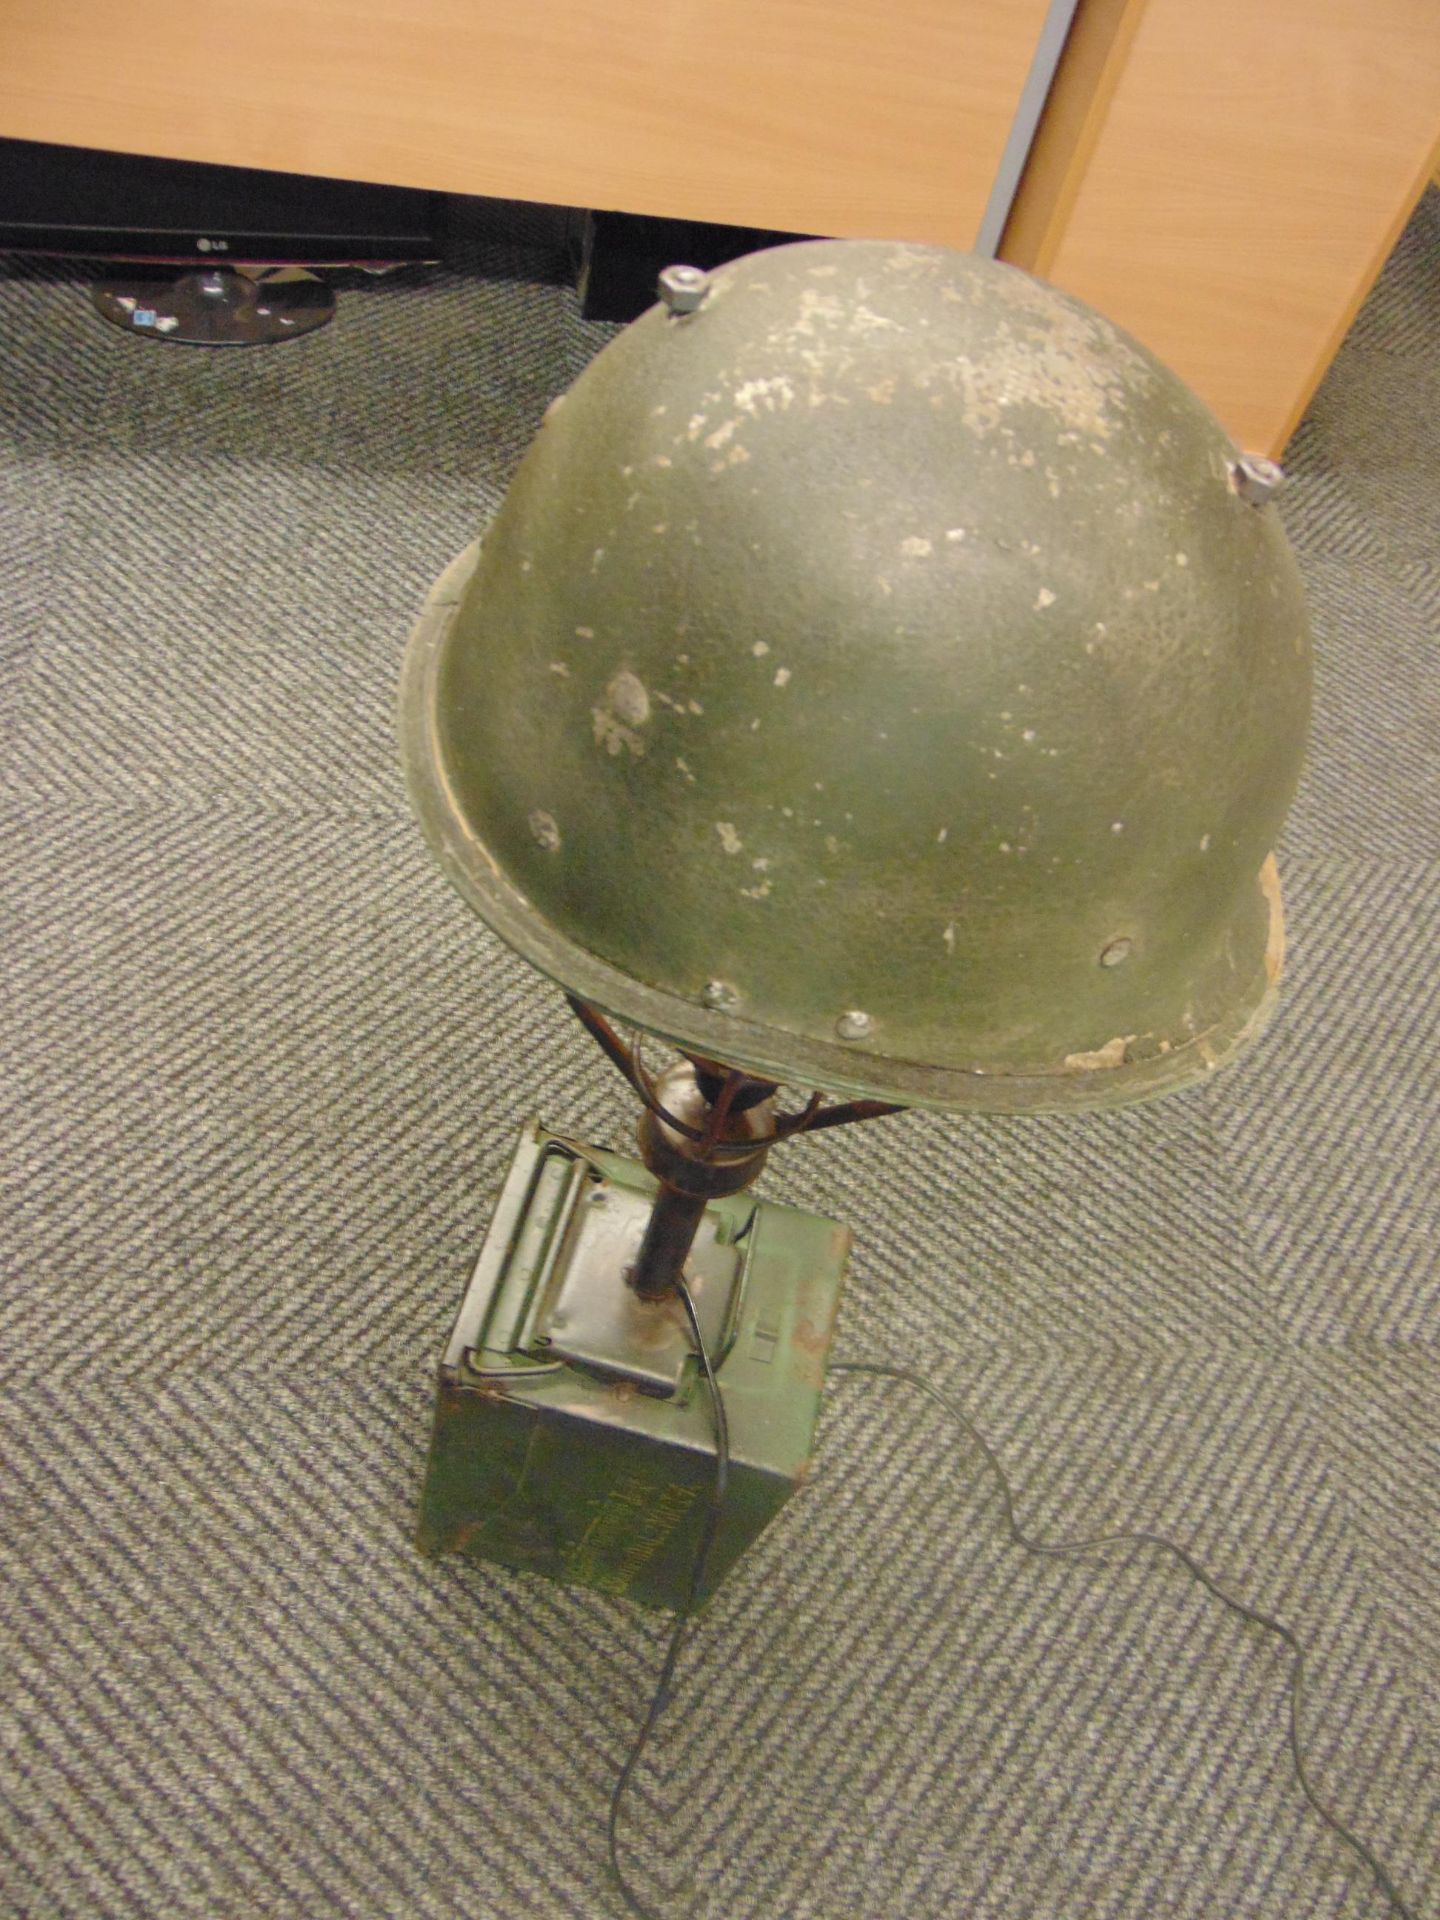 VERY UNUSUAL TABLE LAMP MADE FROM STEEL COMBAT HELMET AMNO BOX ETC - Image 3 of 7